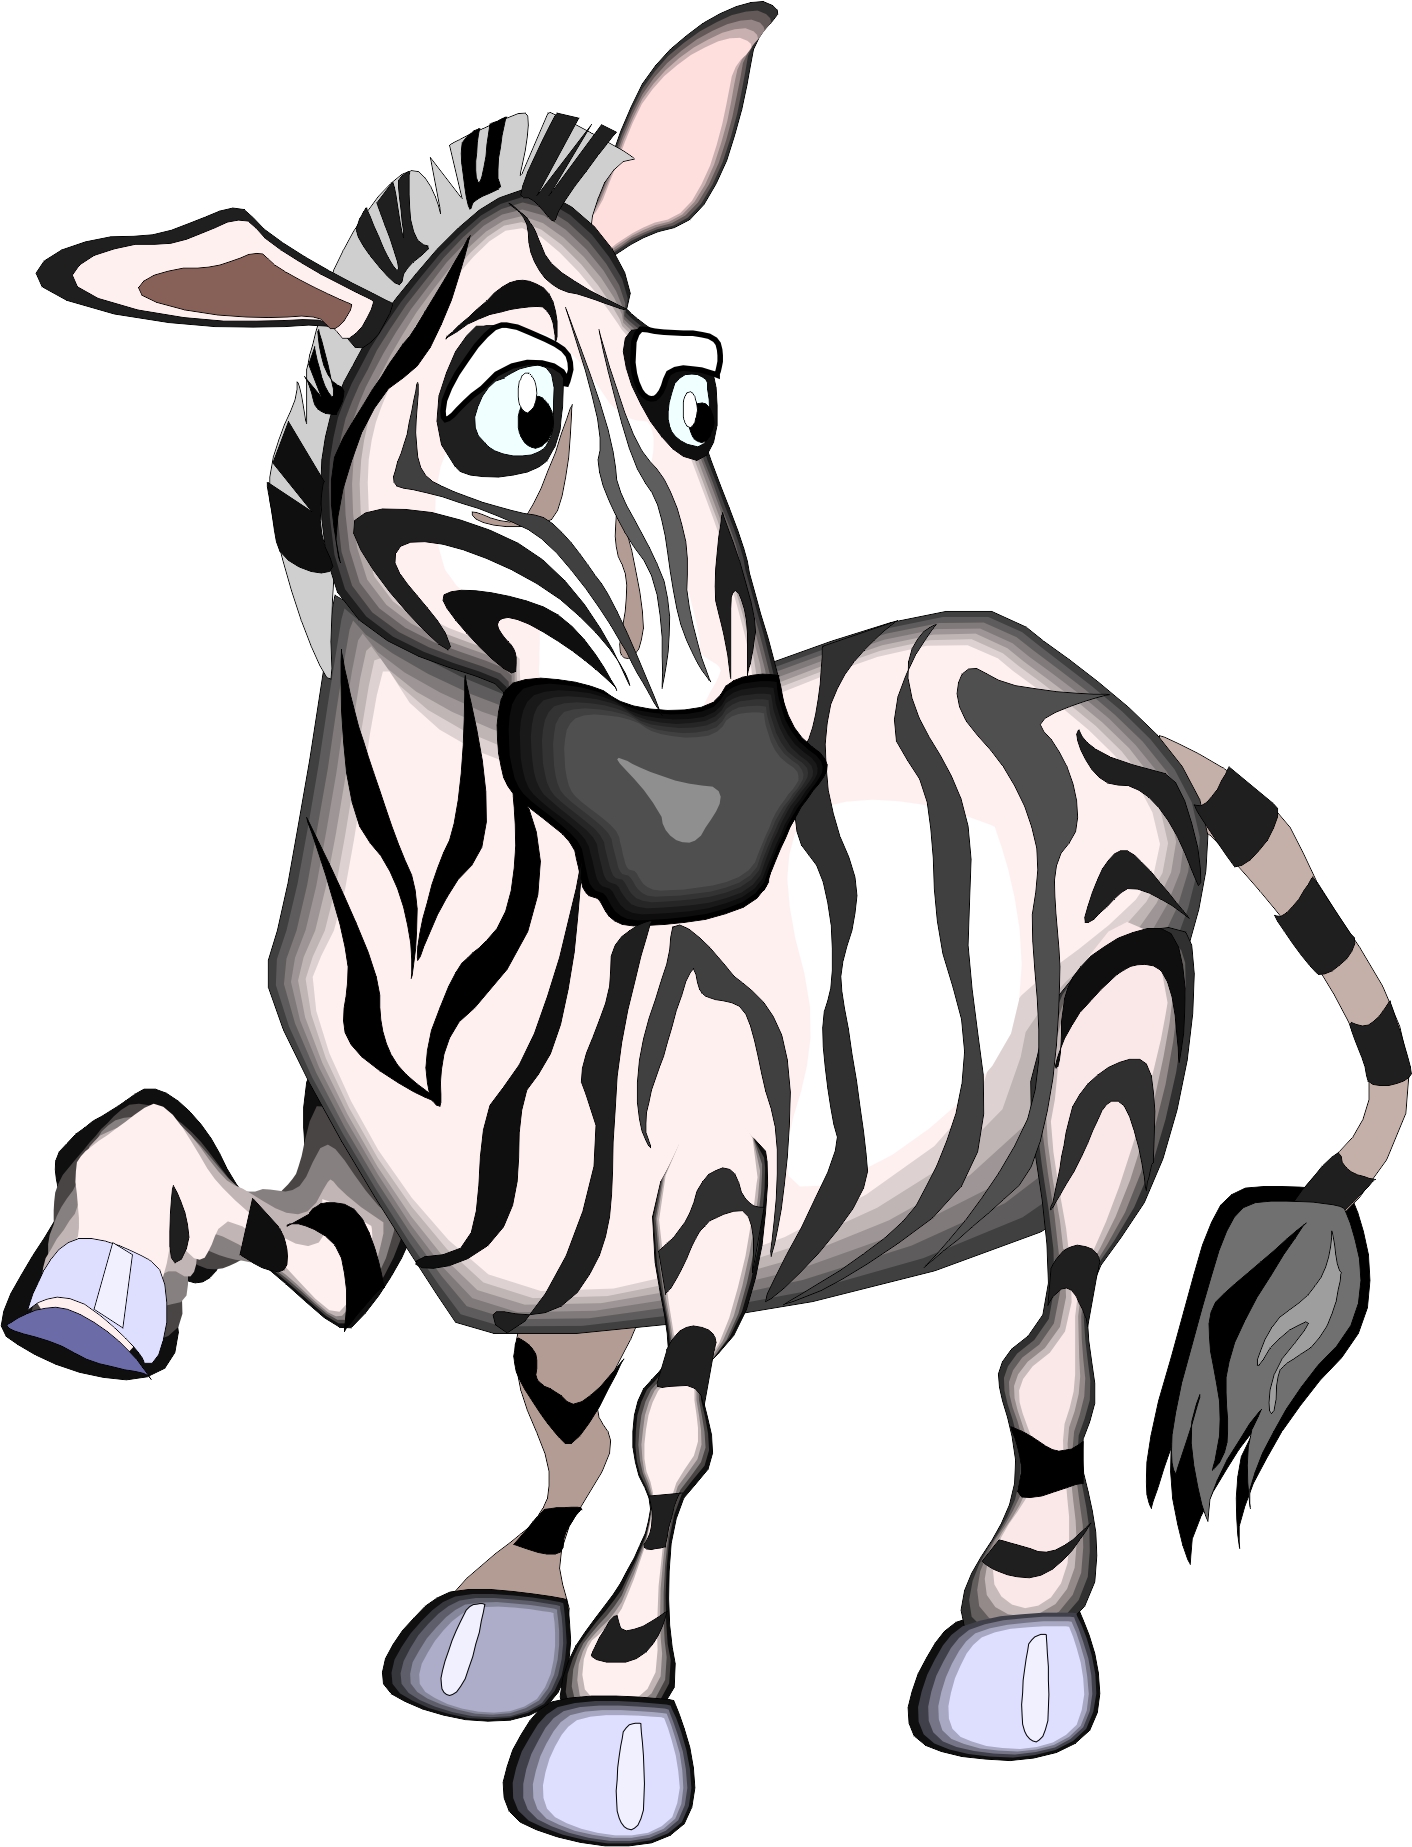 Pictures Of Cartoon Zebras | Free Download Clip Art | Free Clip ...